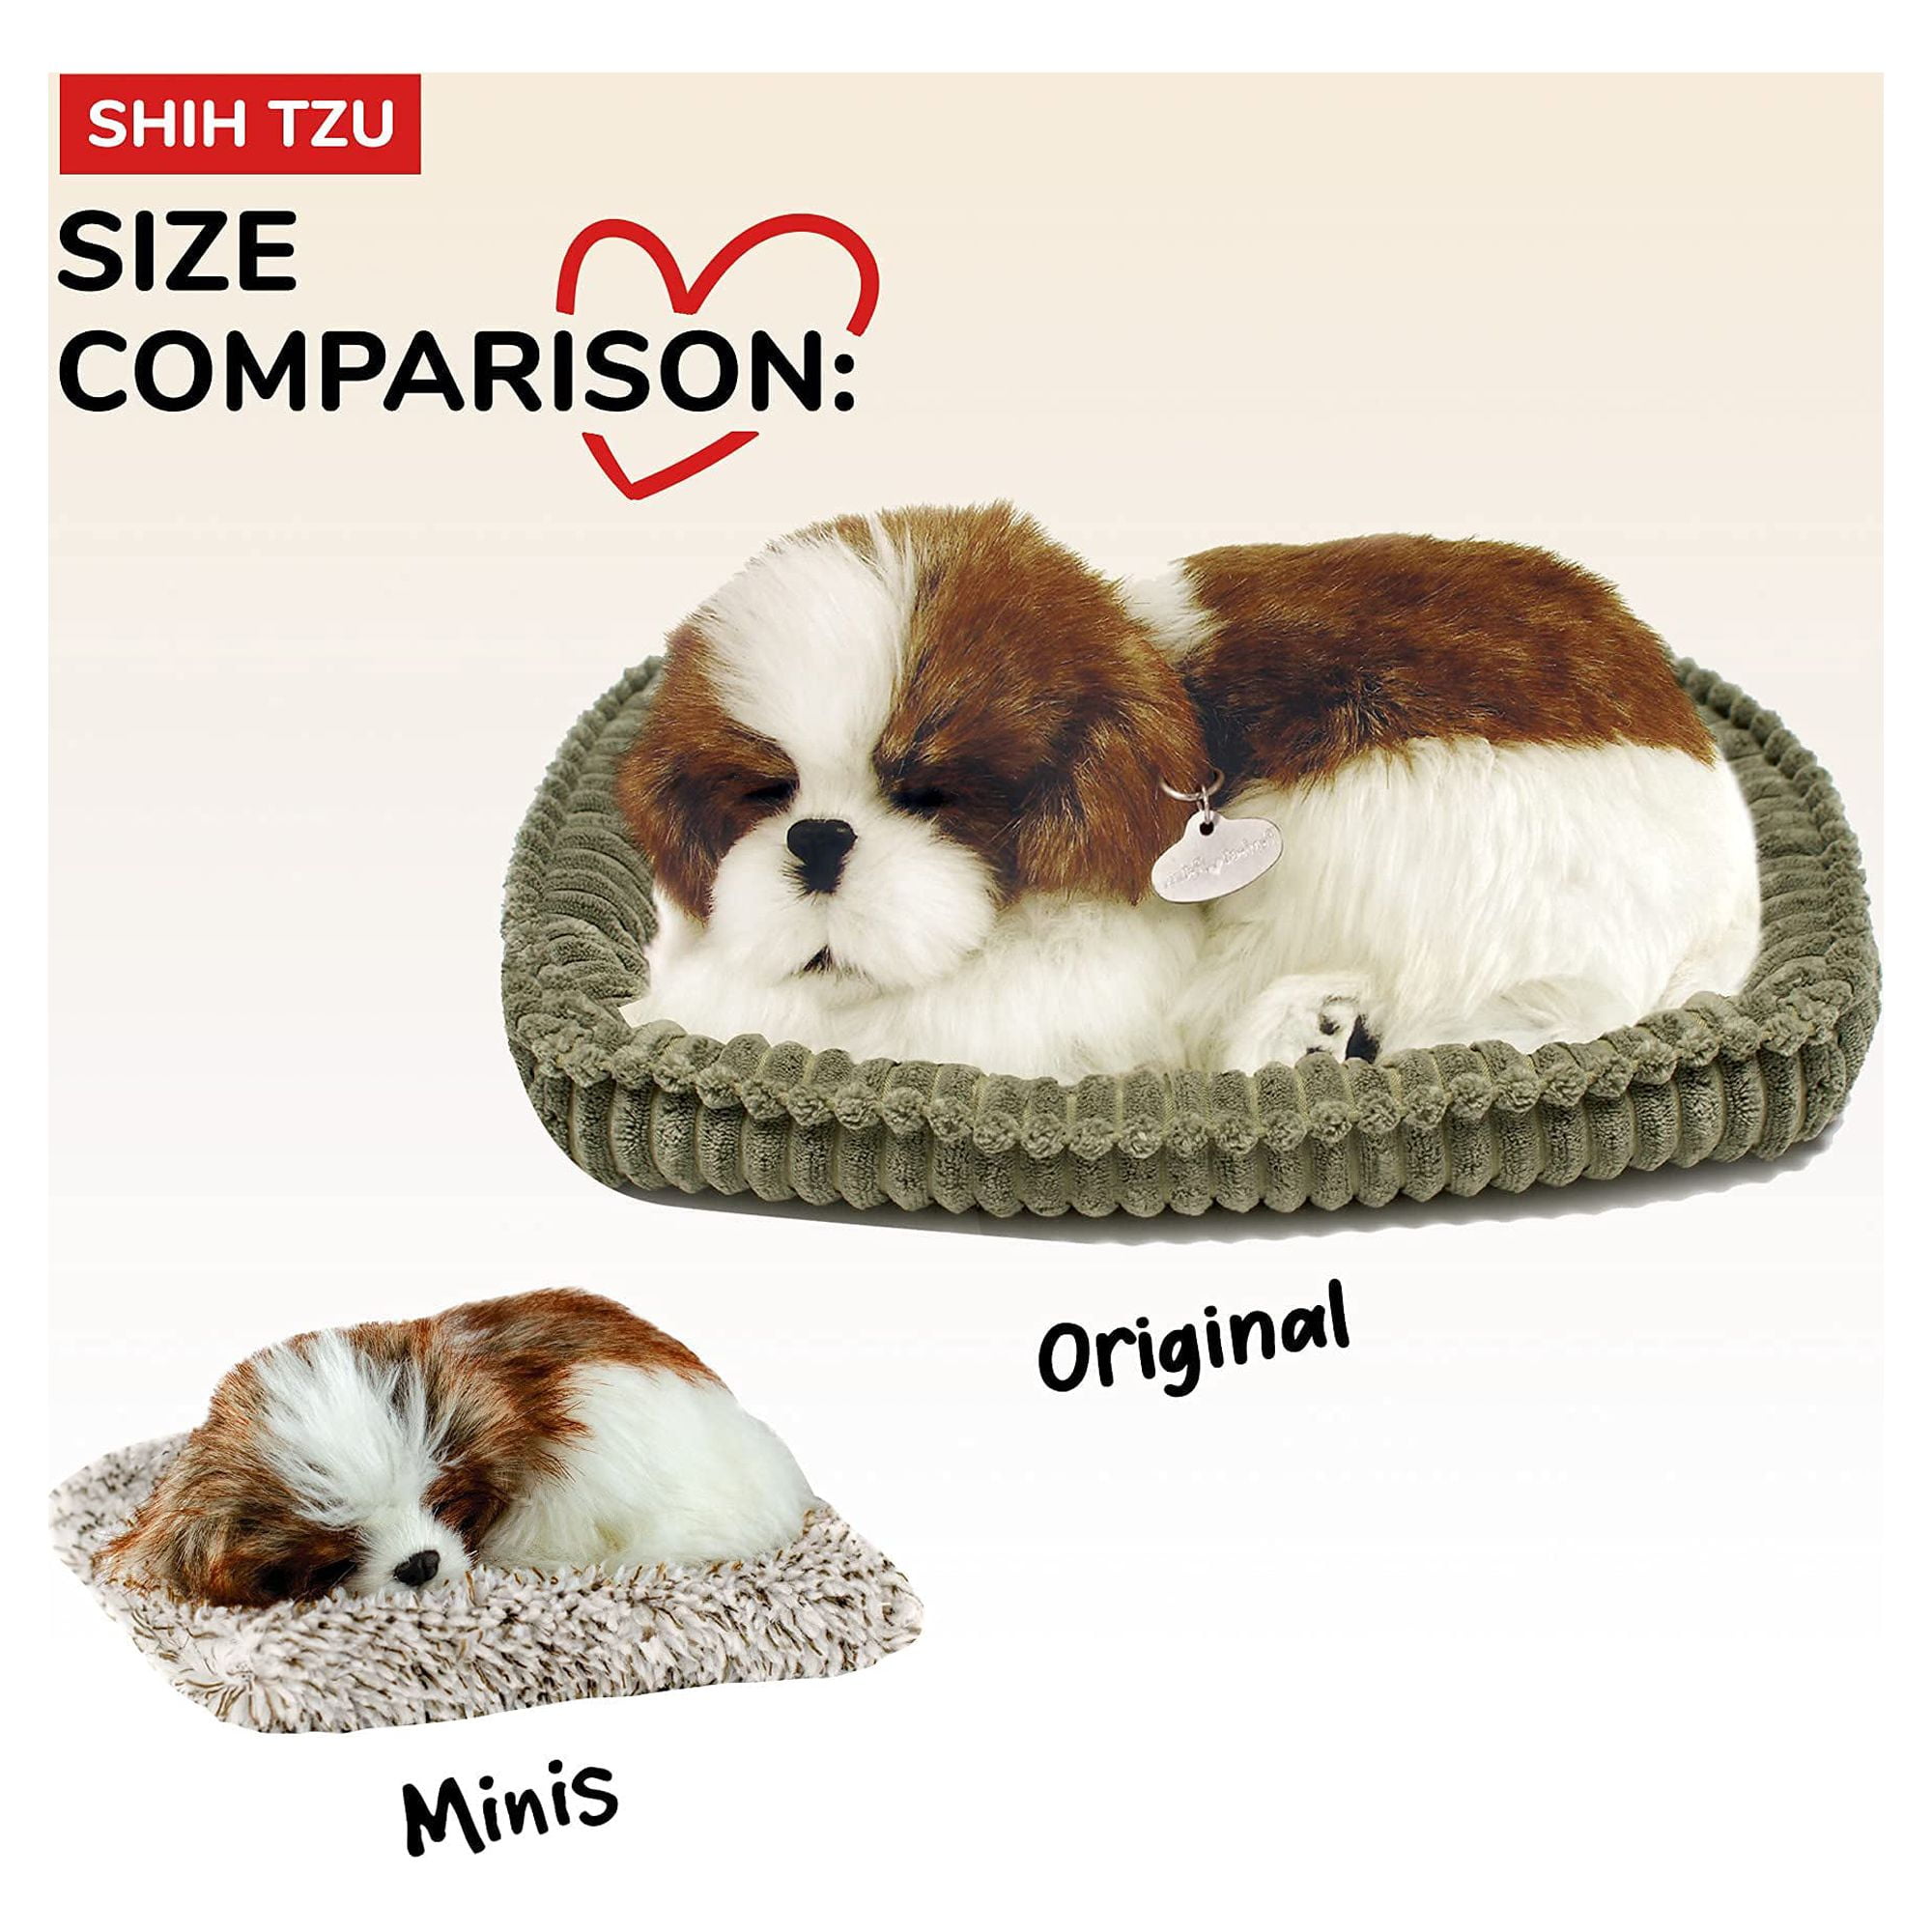 Perfect Petzzz - Original Shih Tzu, Realistic, Lifelike Stuffed Interactive  Pet Toy, Companion Dog with 100% Handcrafted Synthetic Fur